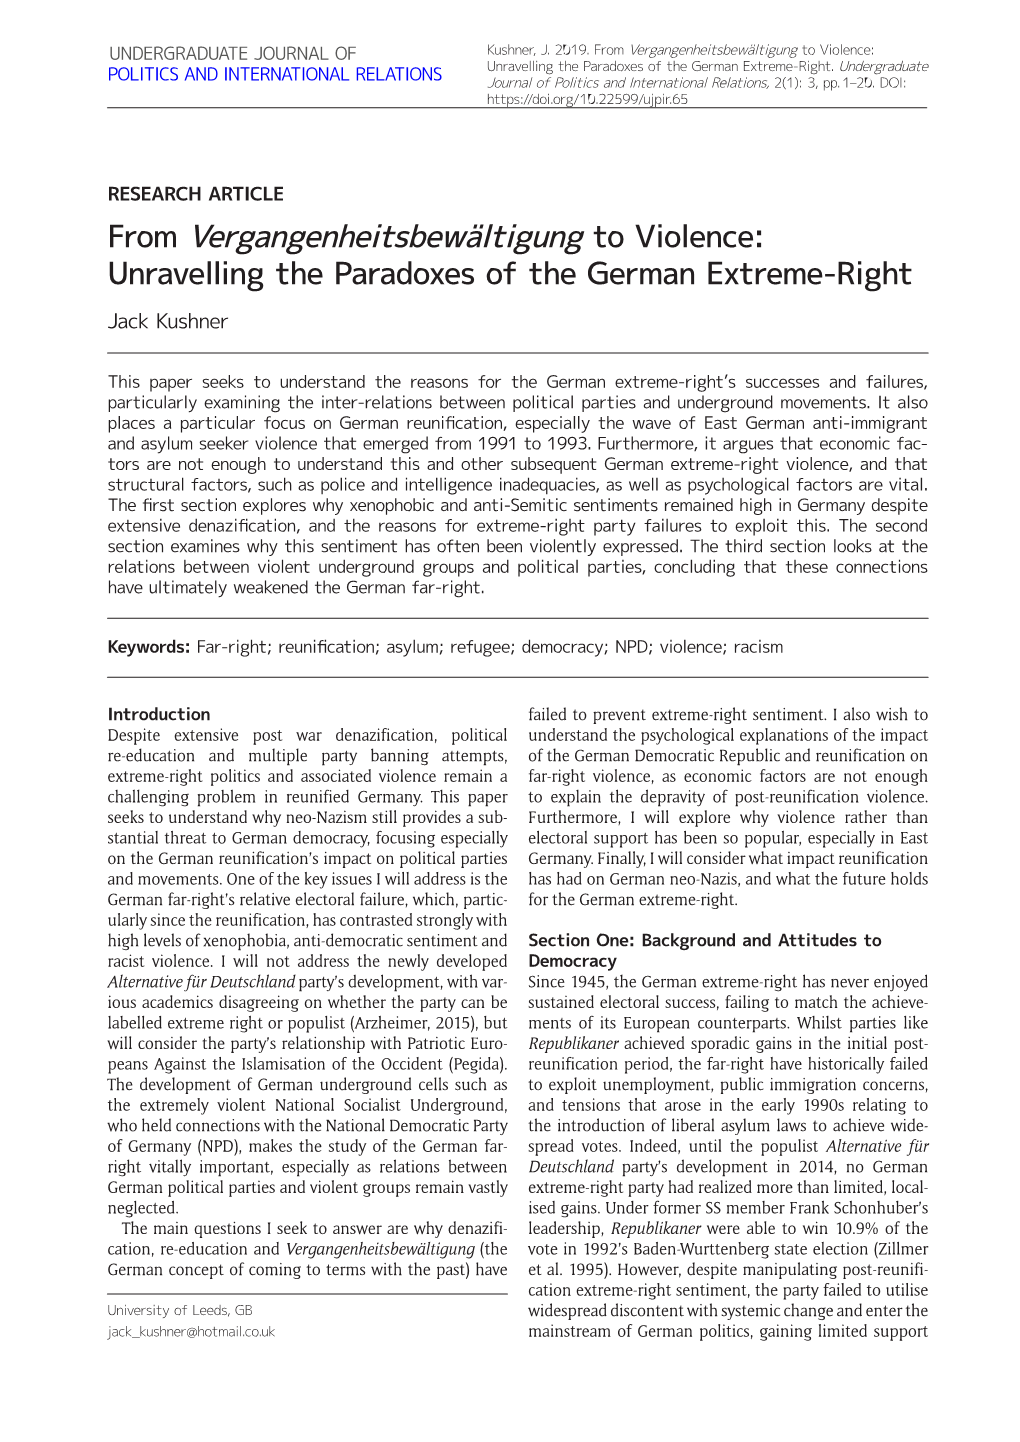 From Vergangenheitsbewältigung to Violence: Unravelling the Paradoxes of the German Extreme-Right